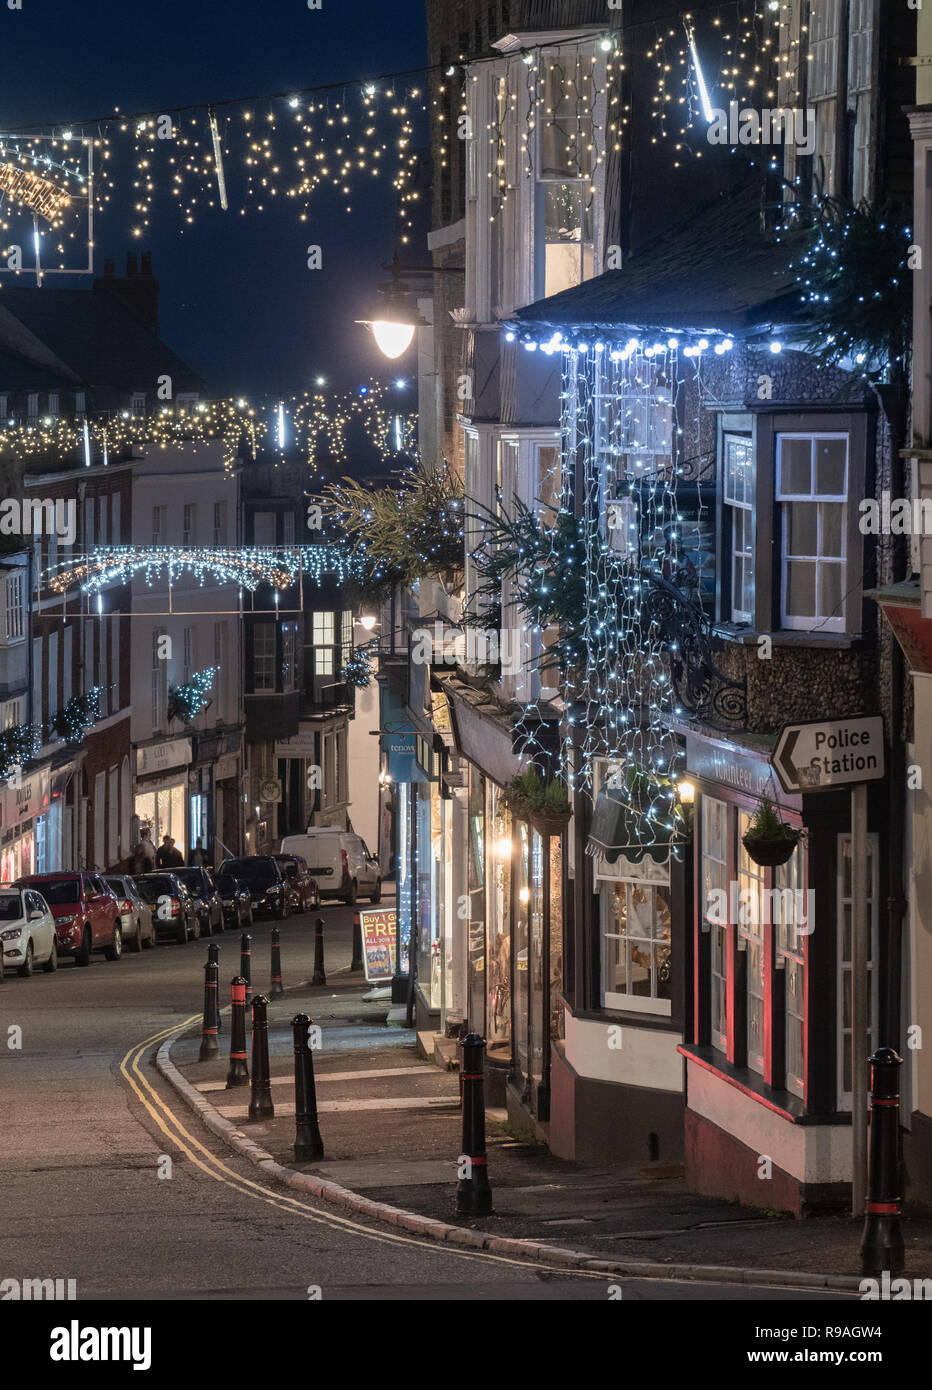 Lyme Regis, Dorset, UK. 21st December 2018. UK Weather: Christmas lights sparkle at dusk on a mild evening at the picturesque coastal town of Lyme Regis on the shortest day of the year.  Credit: DWR/Alamy Live News Stock Photo